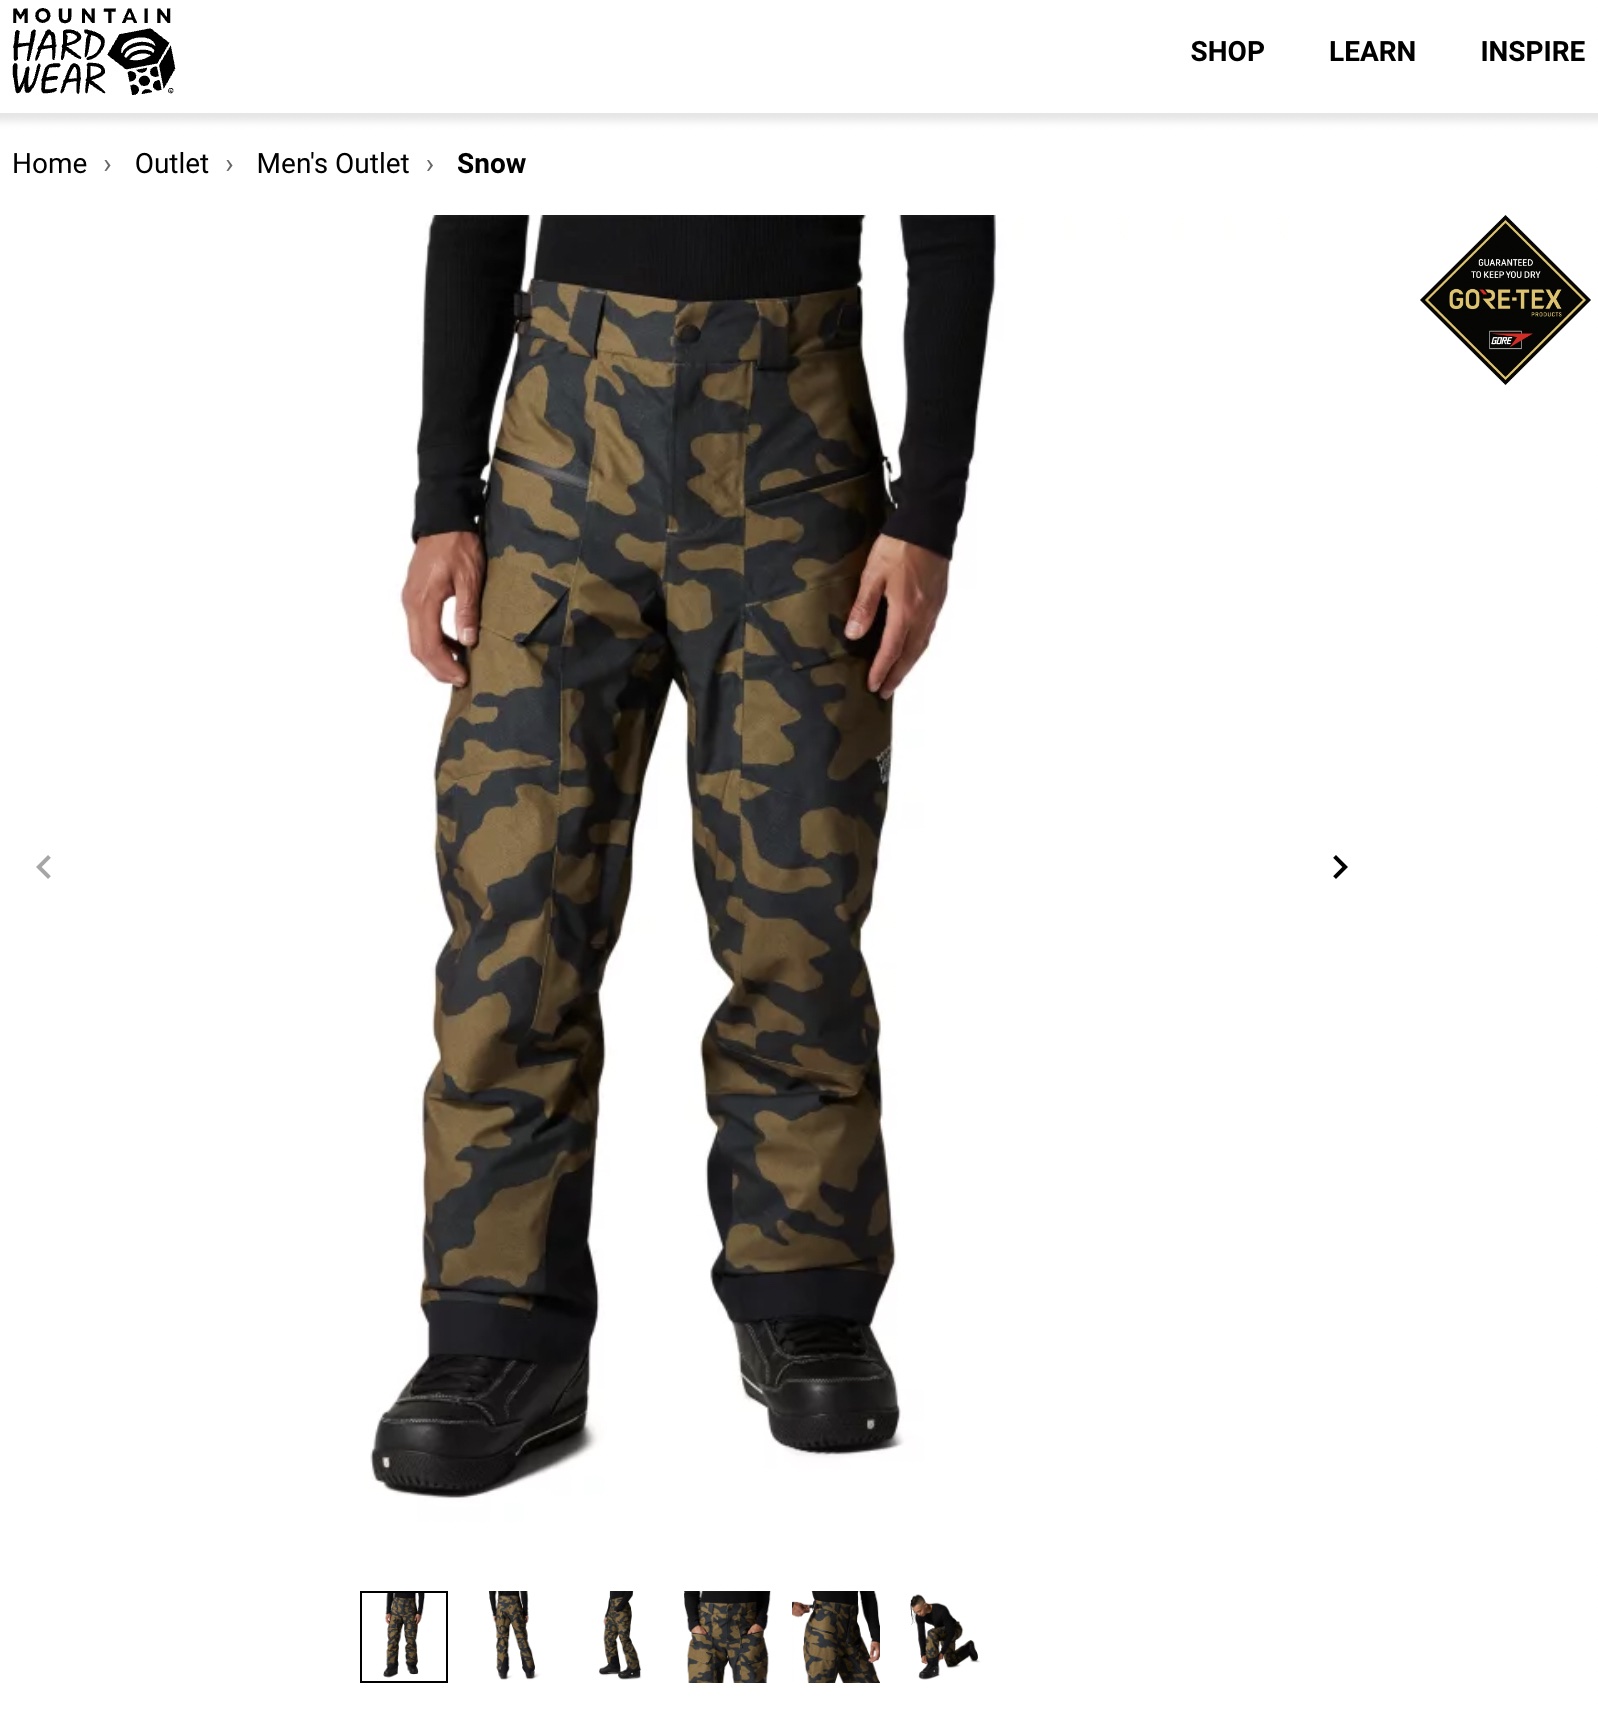 Mountain Hardware Men's Cloud Bank™ Gore Tex Insulated/Ski/Snowboard Pants only in camouflage $140